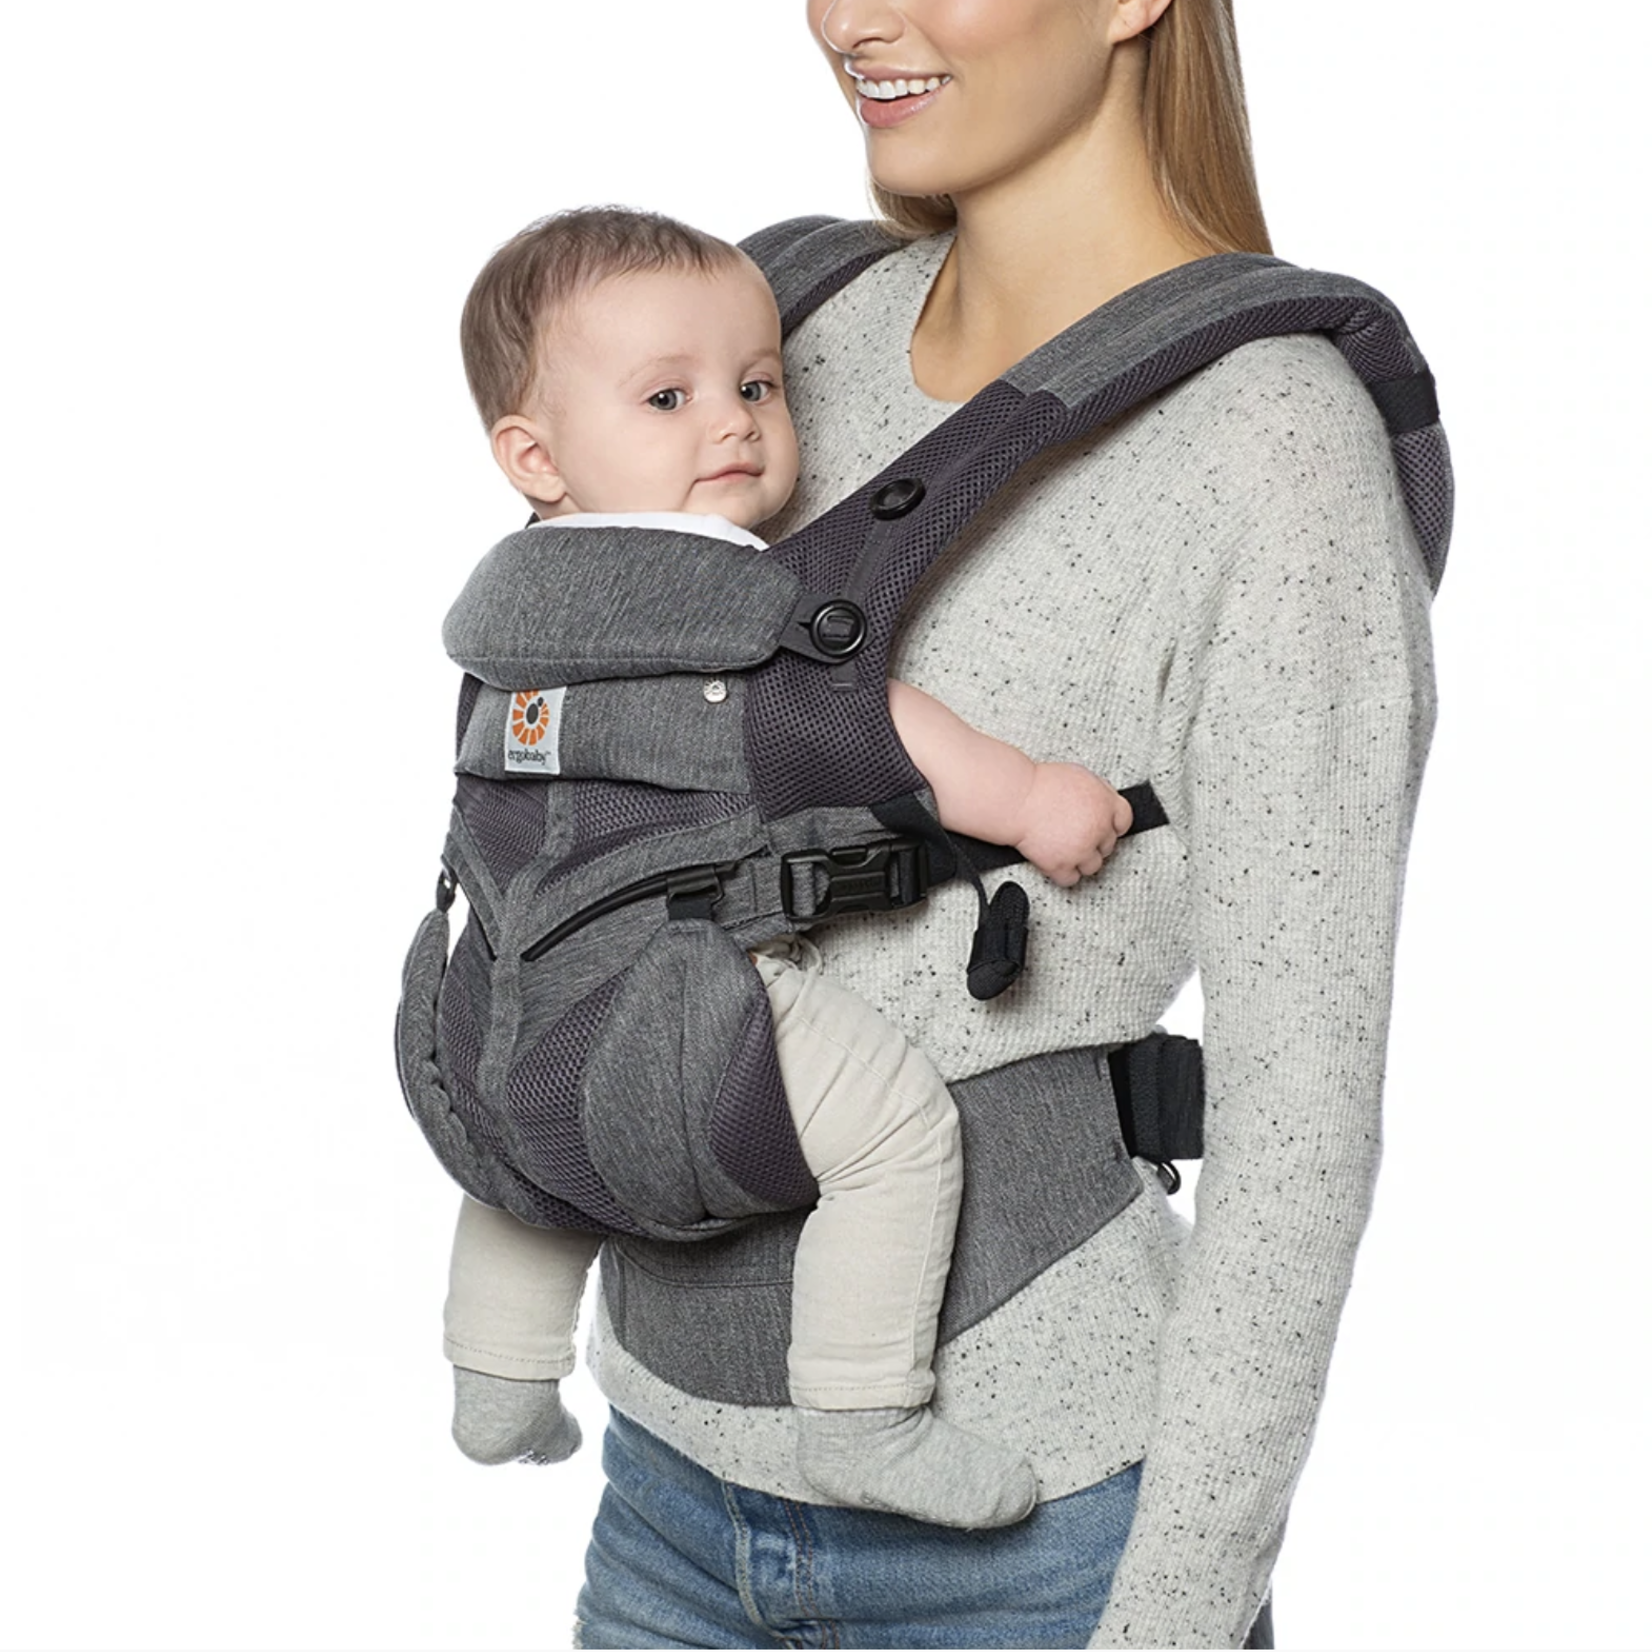 ERGOBABY OMNI 360 COOL AIR MESH BABY CARRIER- CLASSIC WEAVE